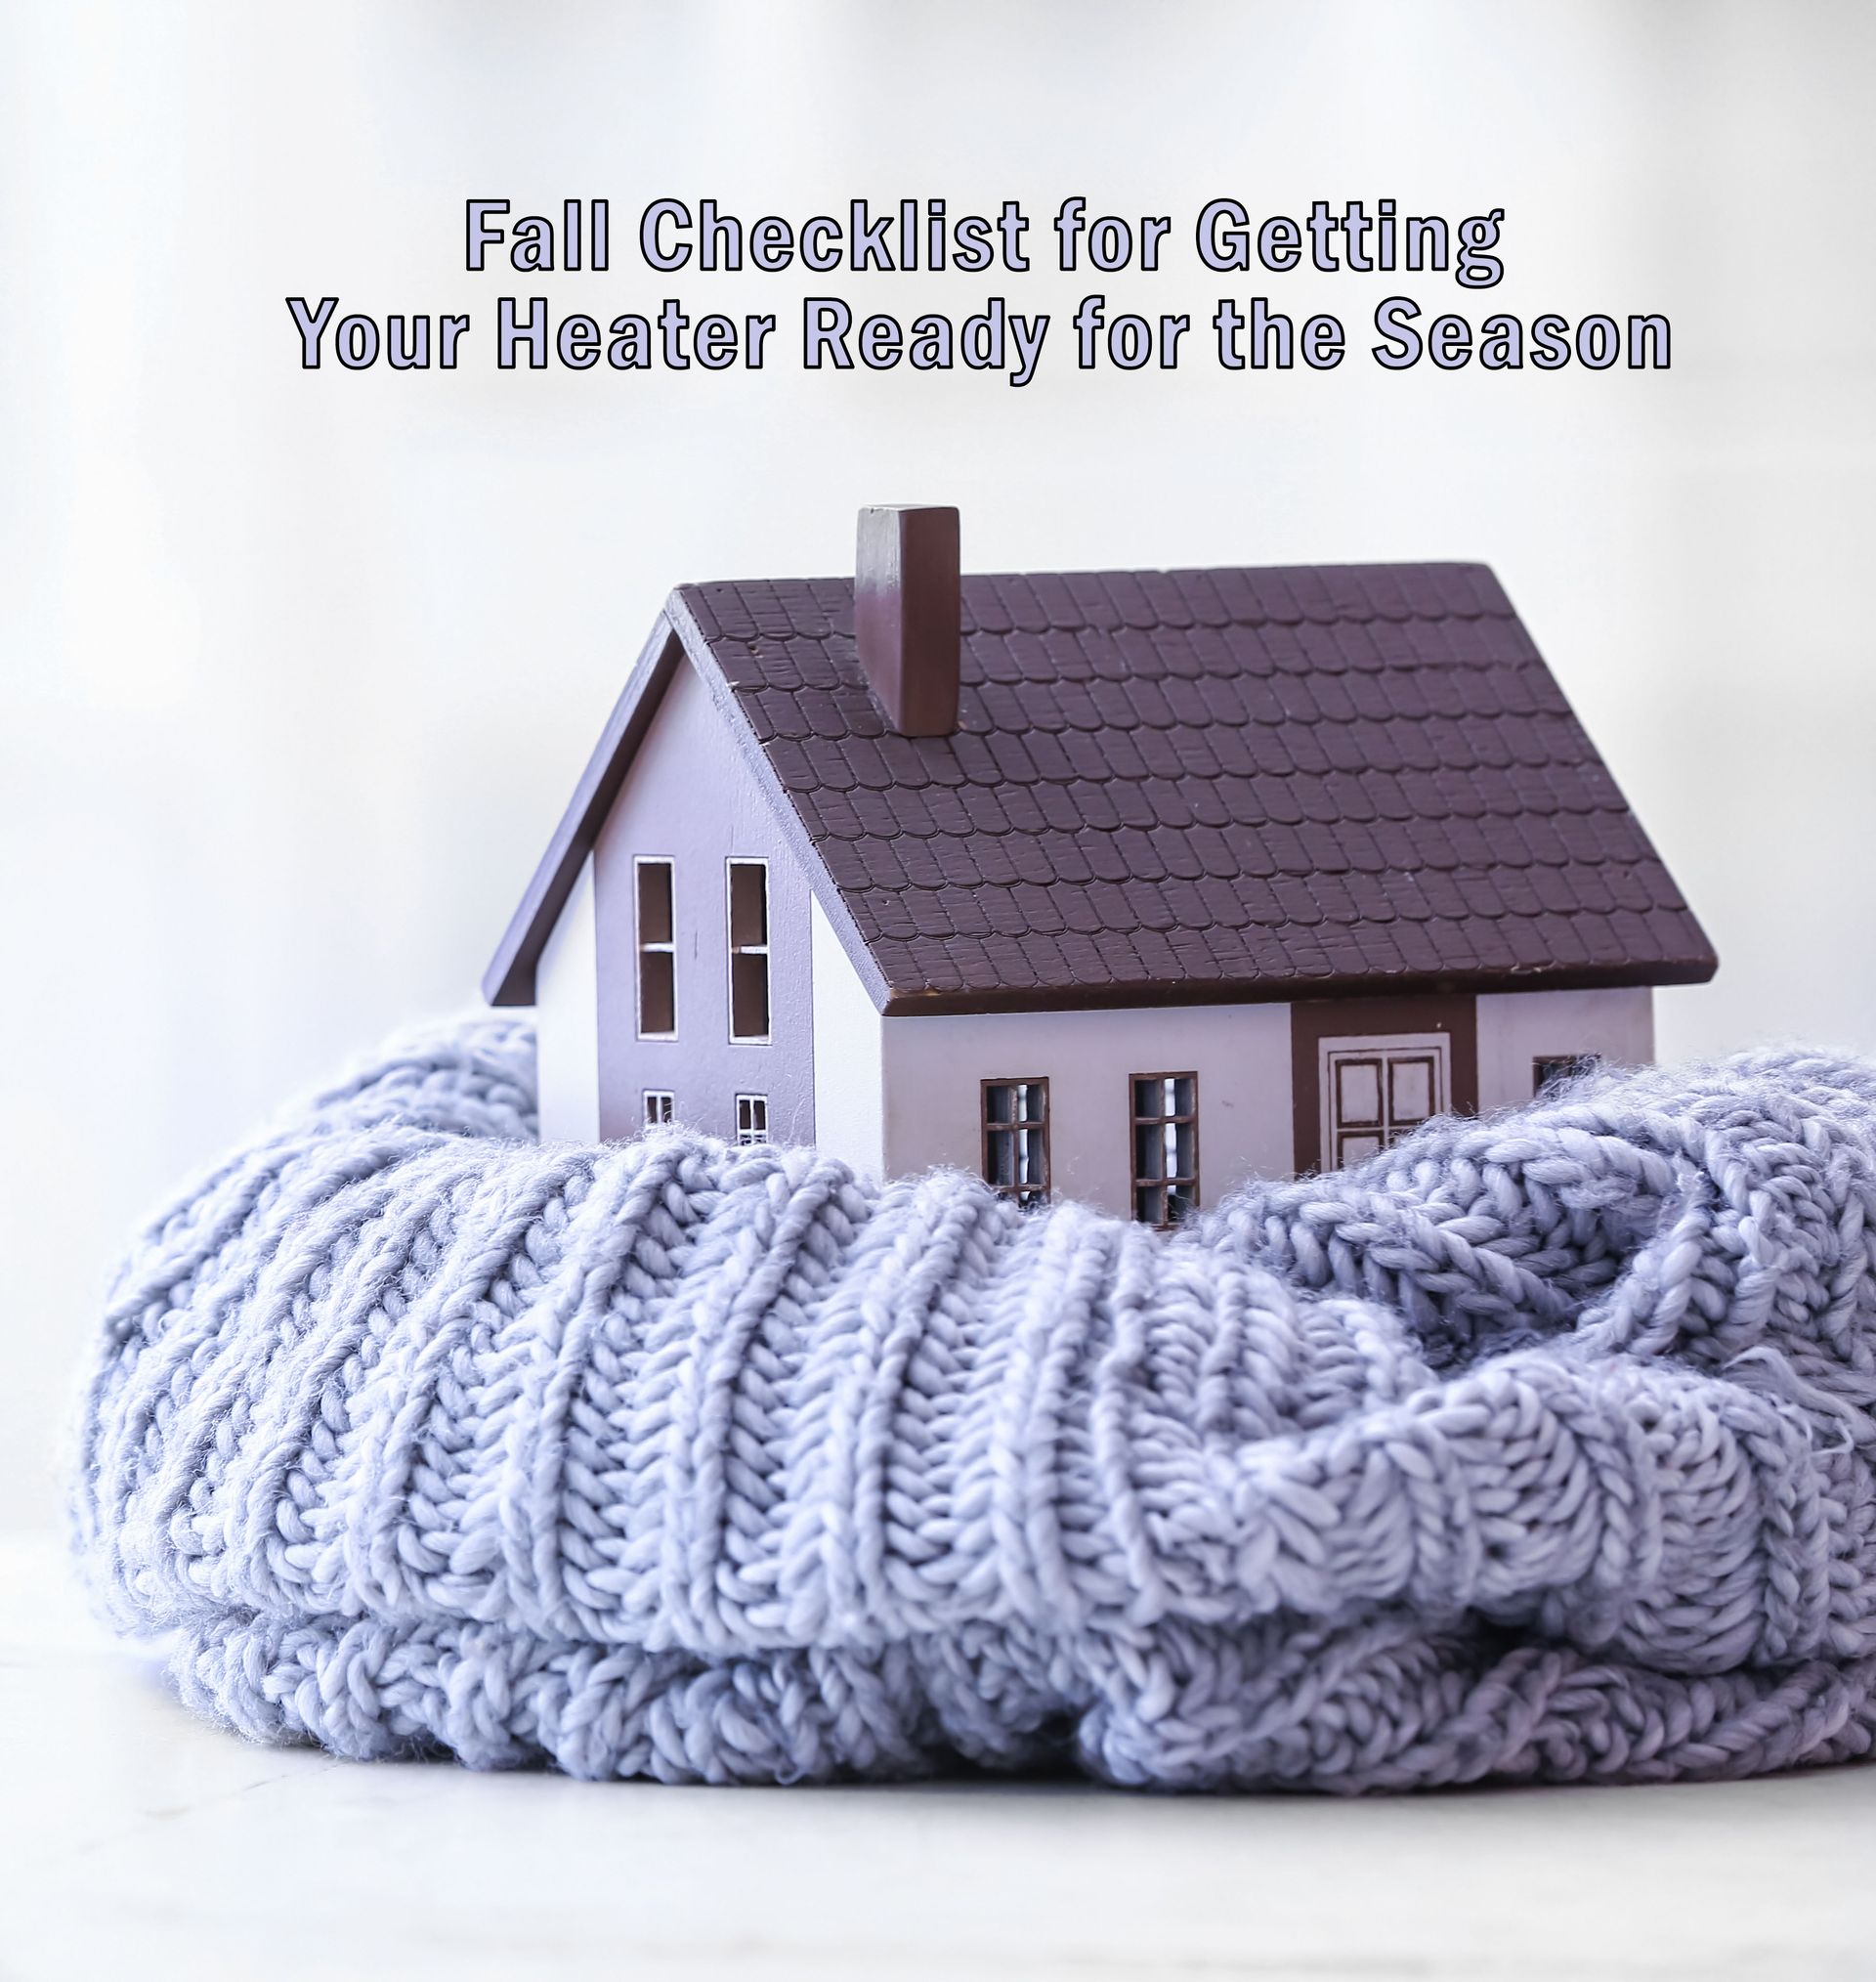 Fall Checklist for Getting Your Heater Ready for the Season